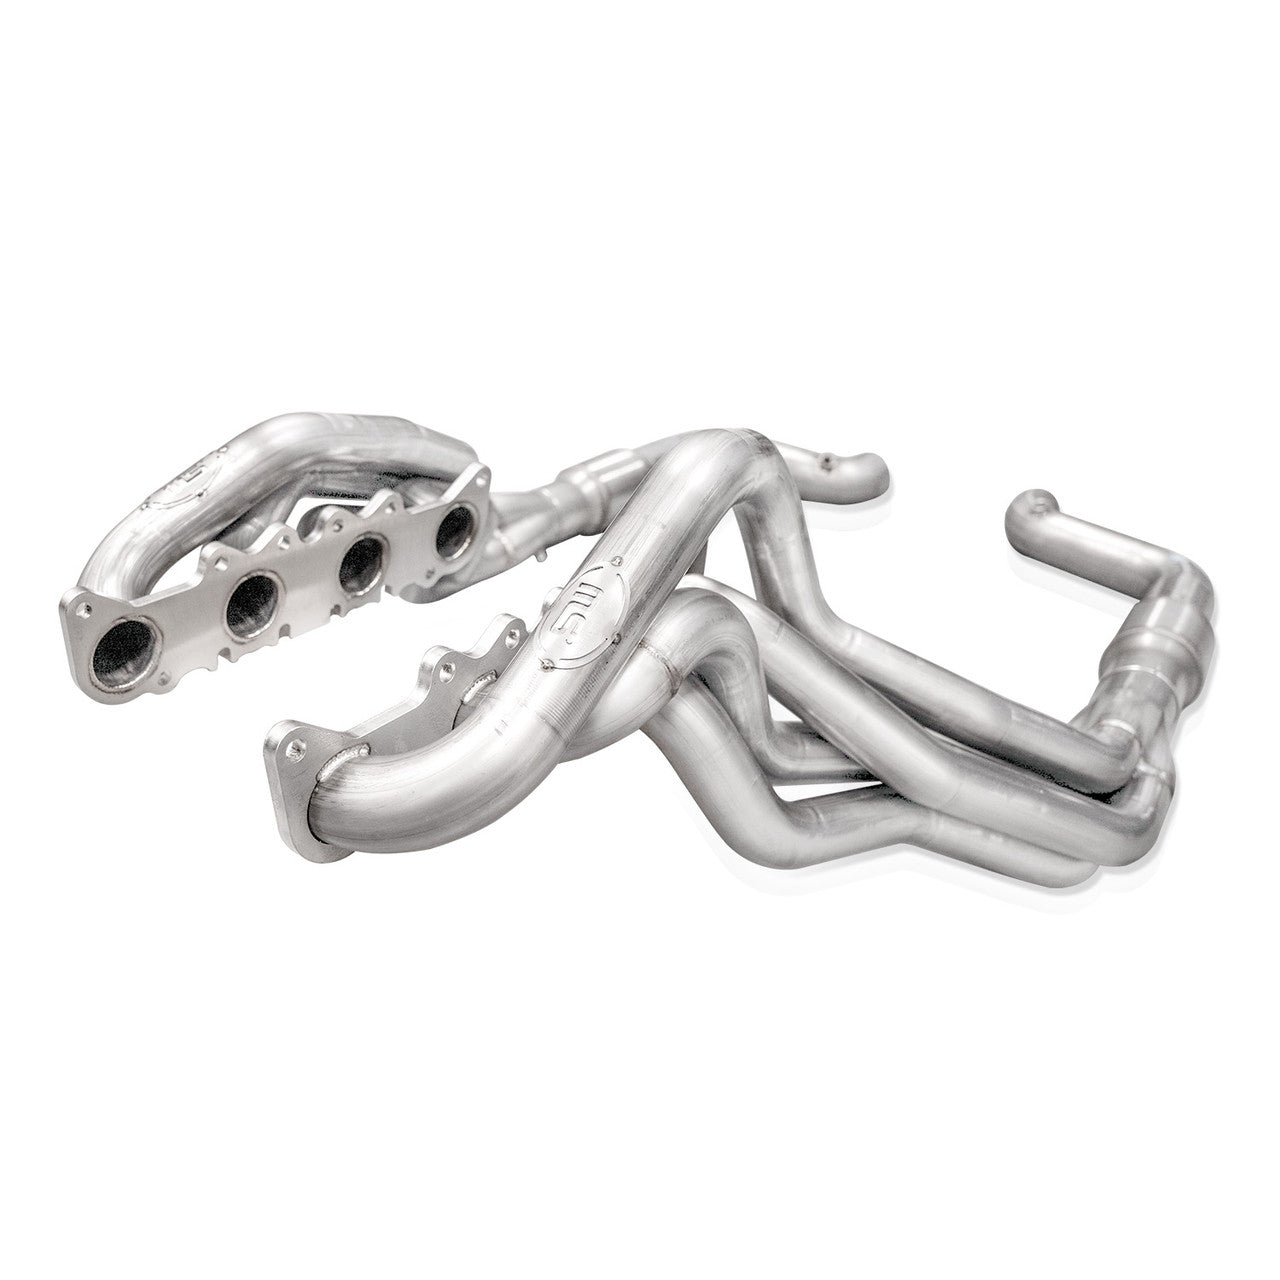 2015-24 Mustang Headers Aftermarket Connect 1-7/8" - SSTubes